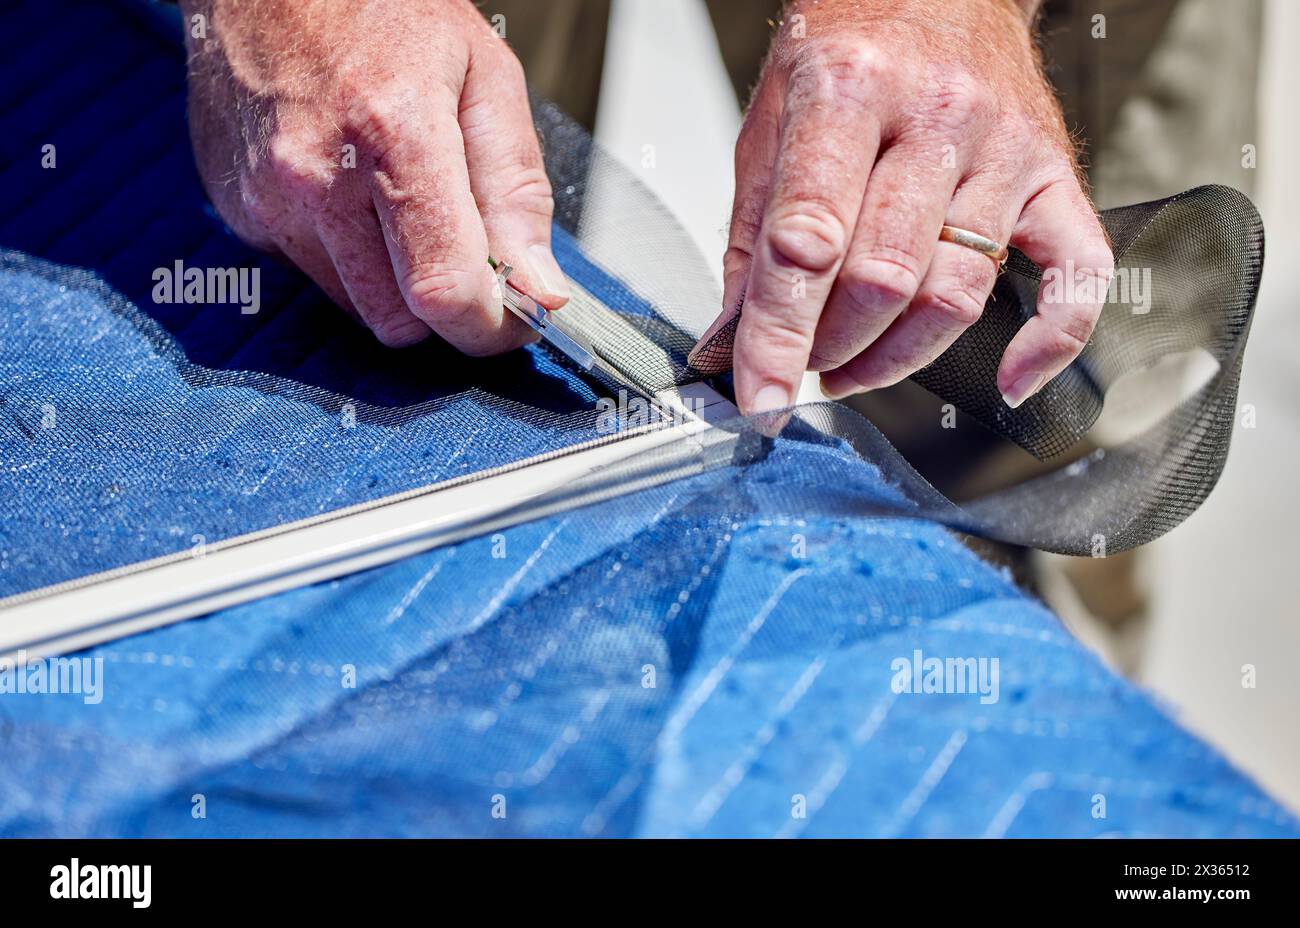 Close up the hands of a man a knife to trim a window screen in a window frame Stock Photo